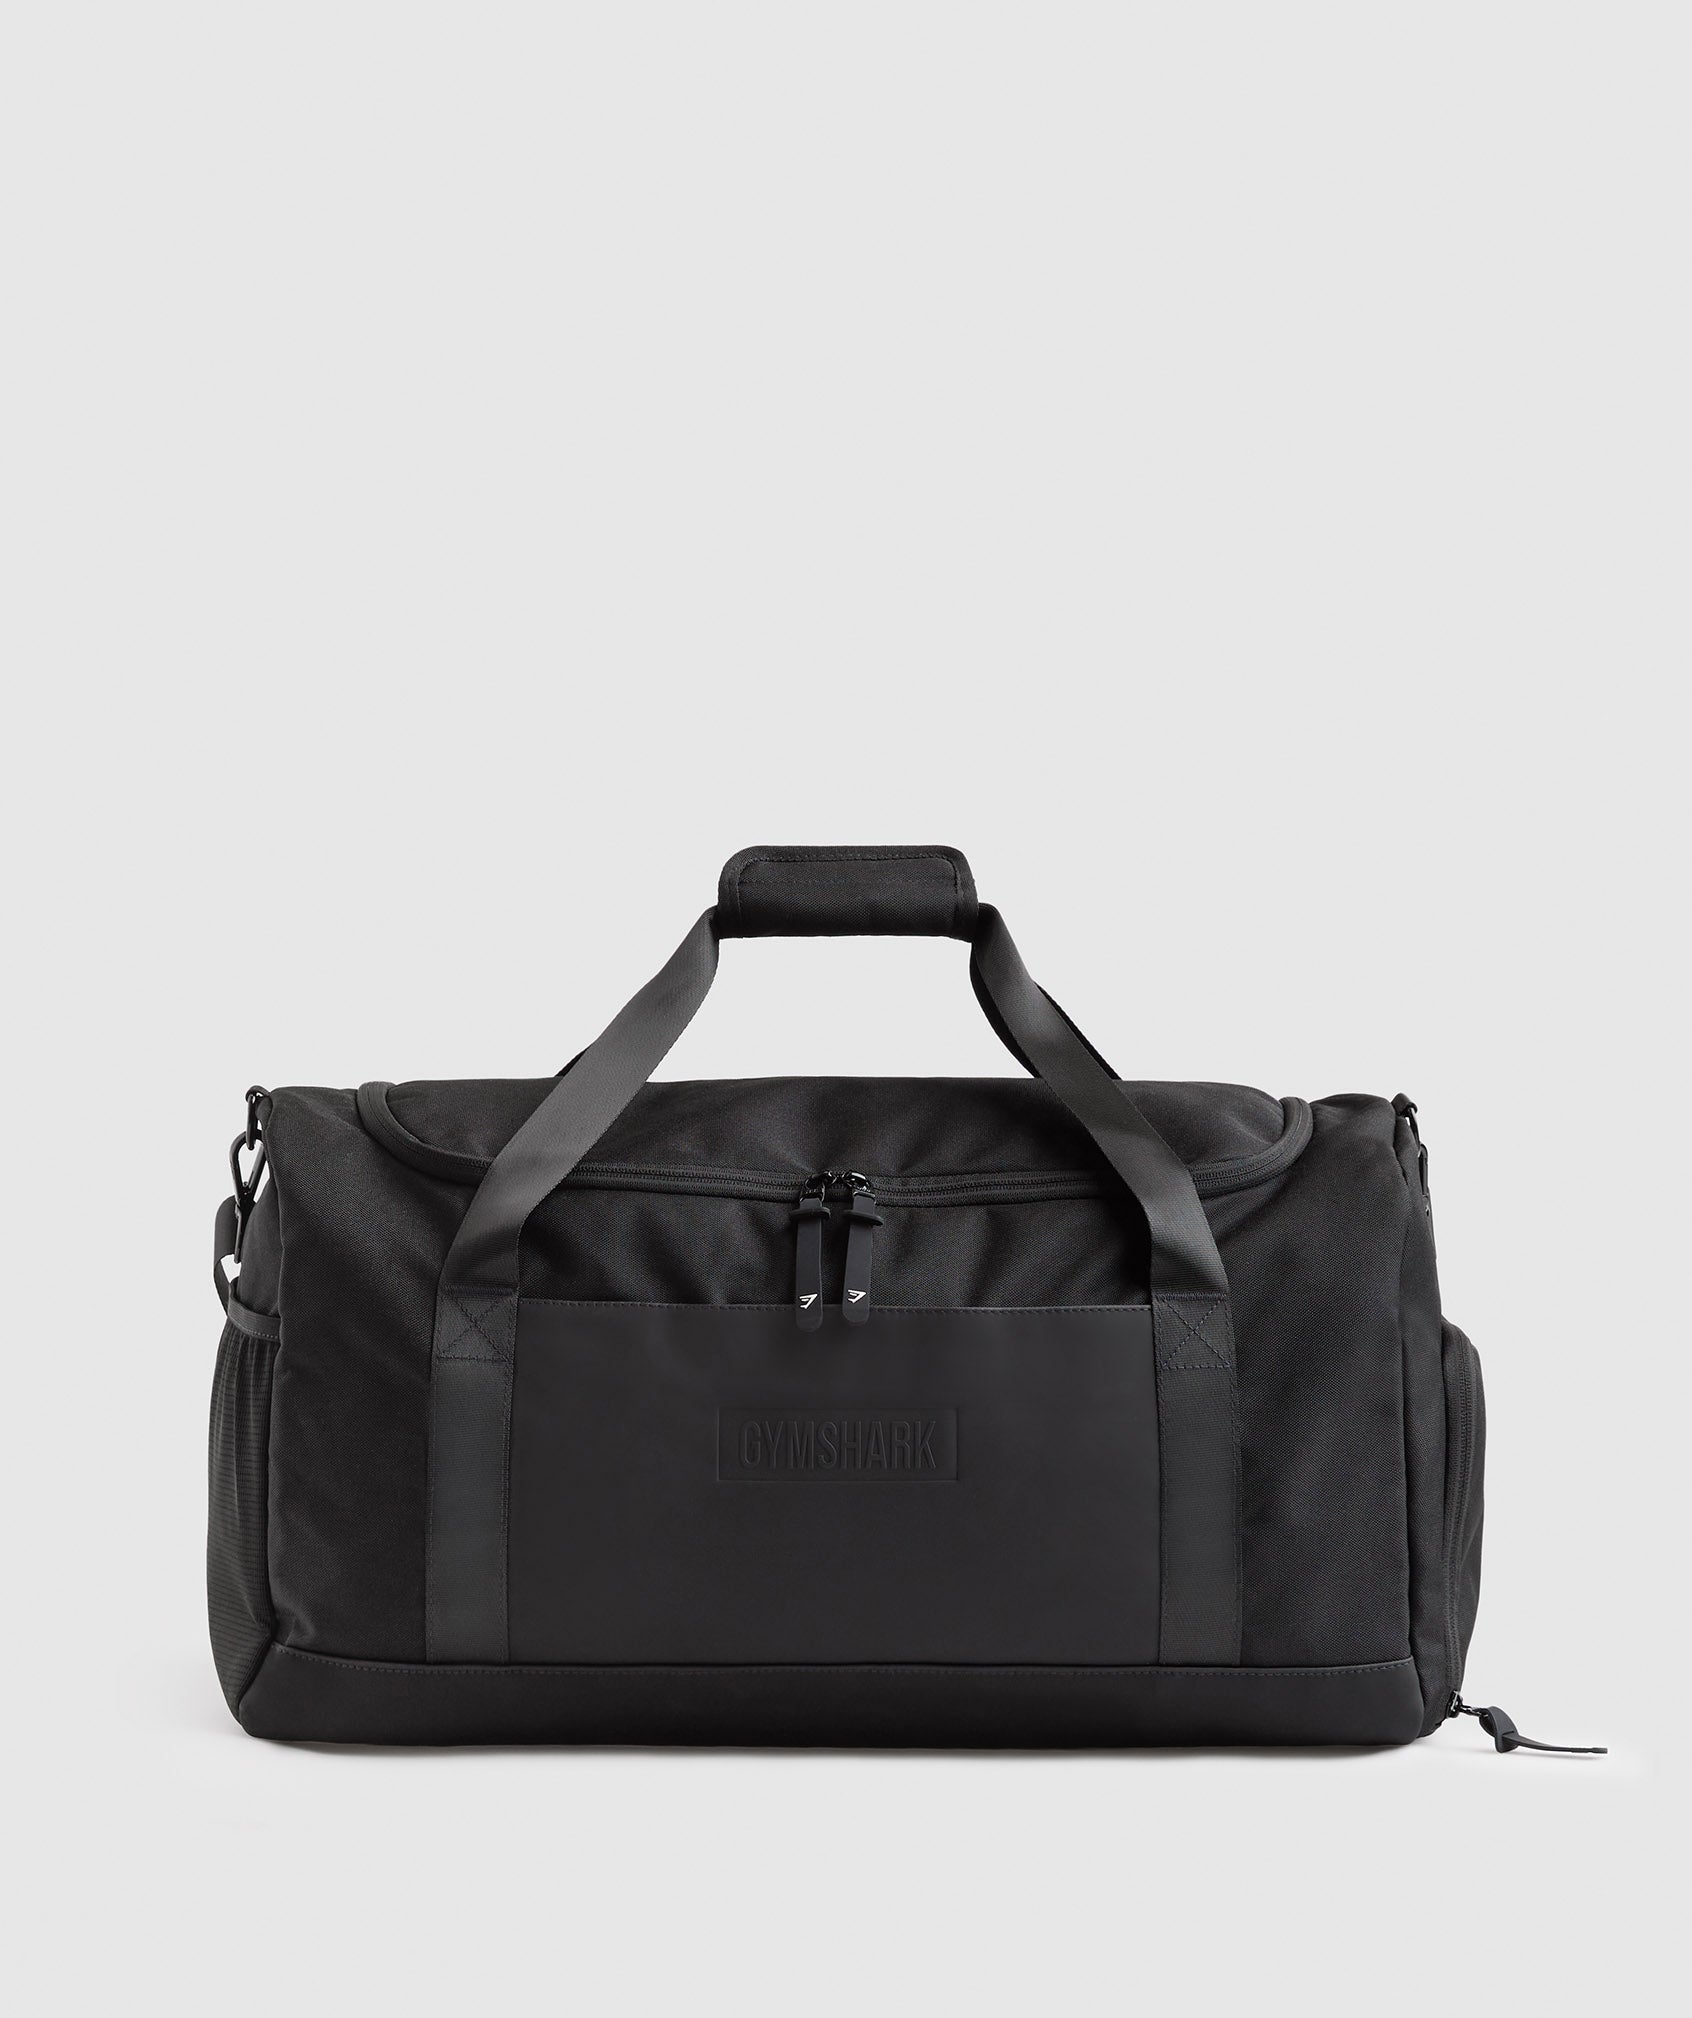 Everyday Gym Bag Medium in Black is out of stock